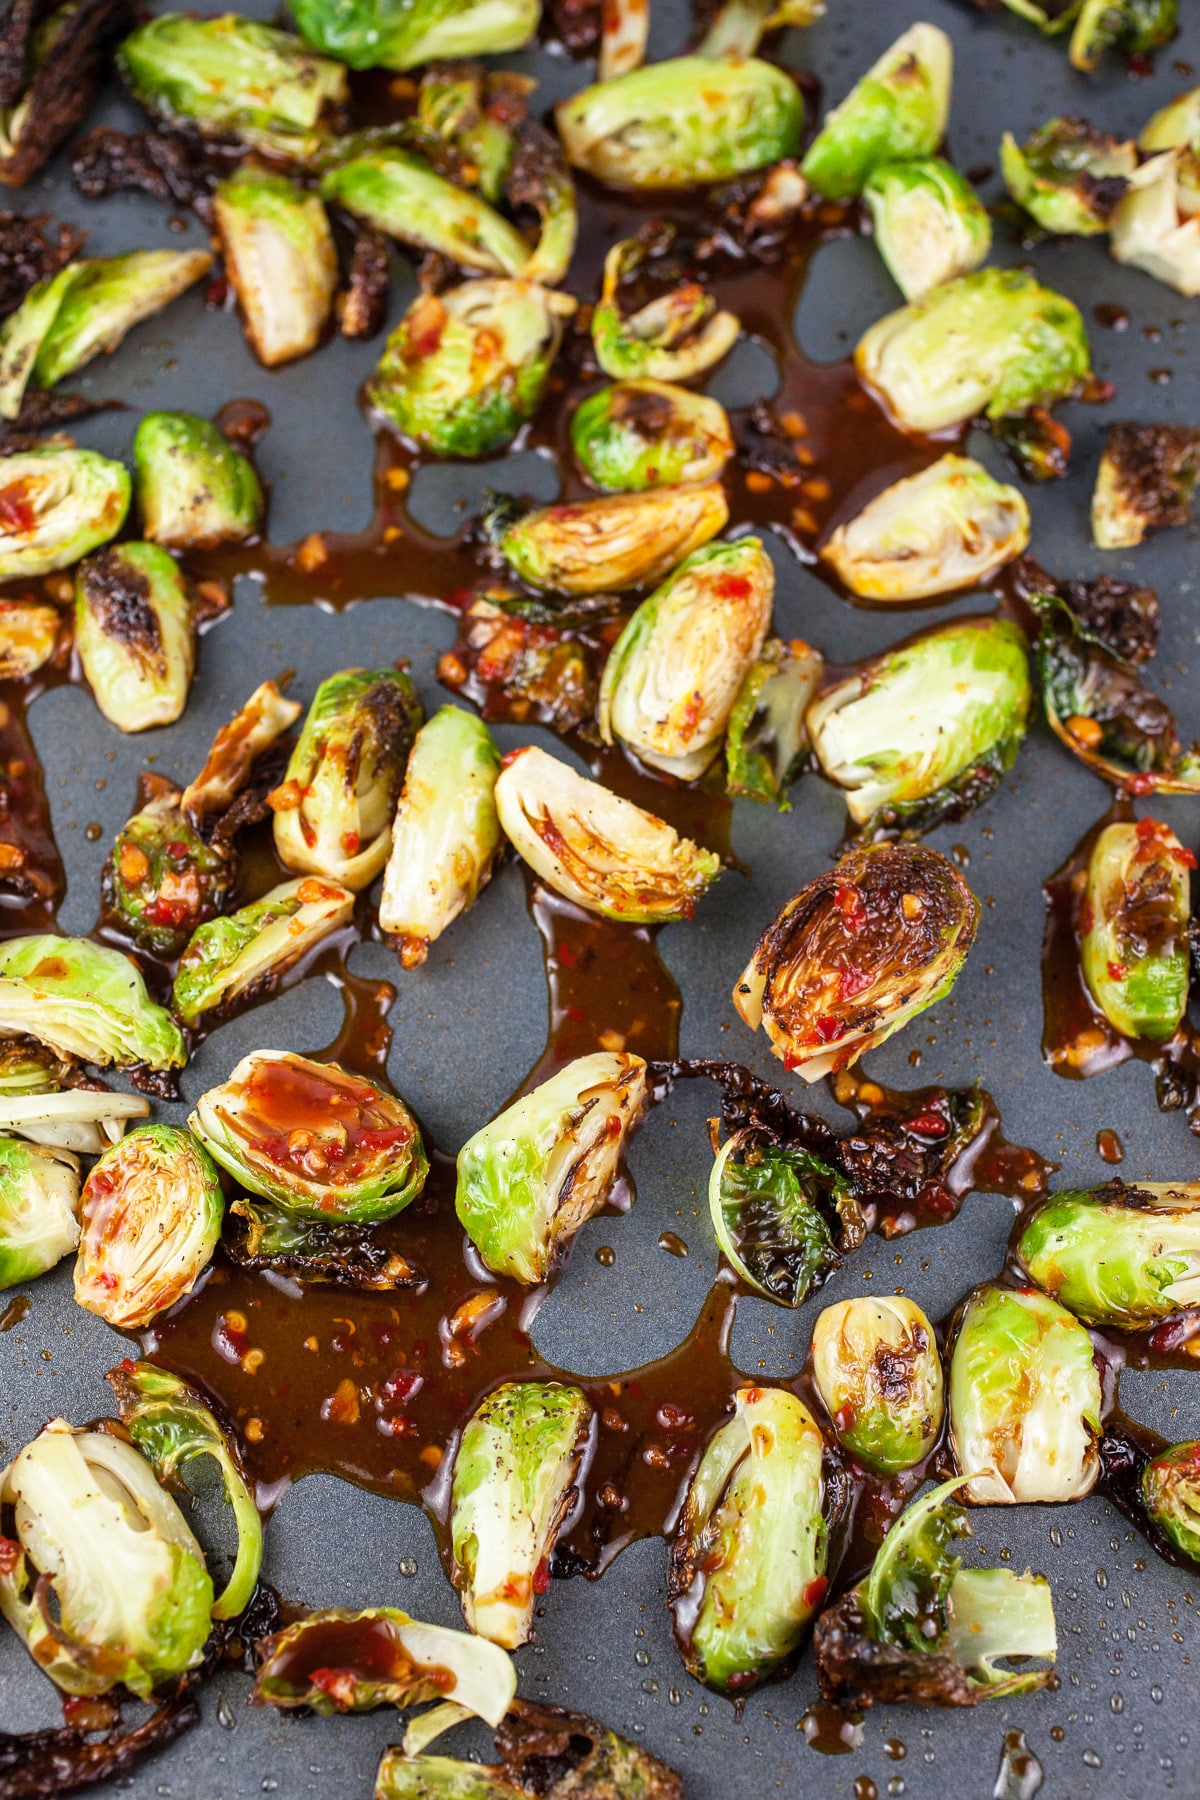 Roasted Brussels sprouts with Asian glaze on baking sheet.